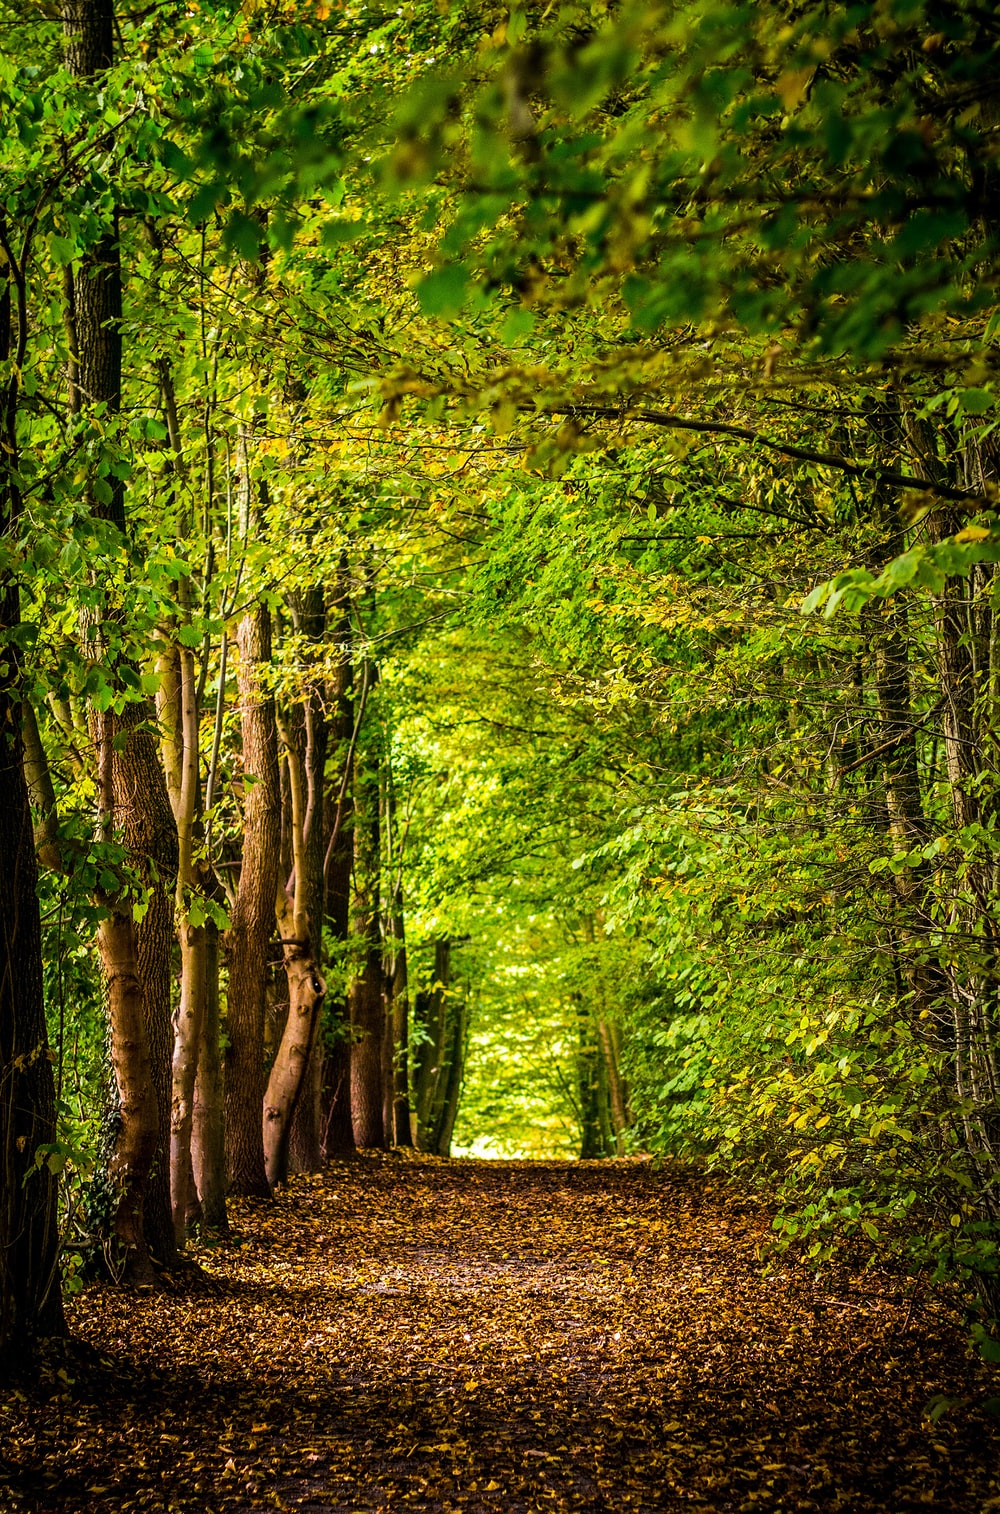 Deciduous Forest Picture. Download Free Image